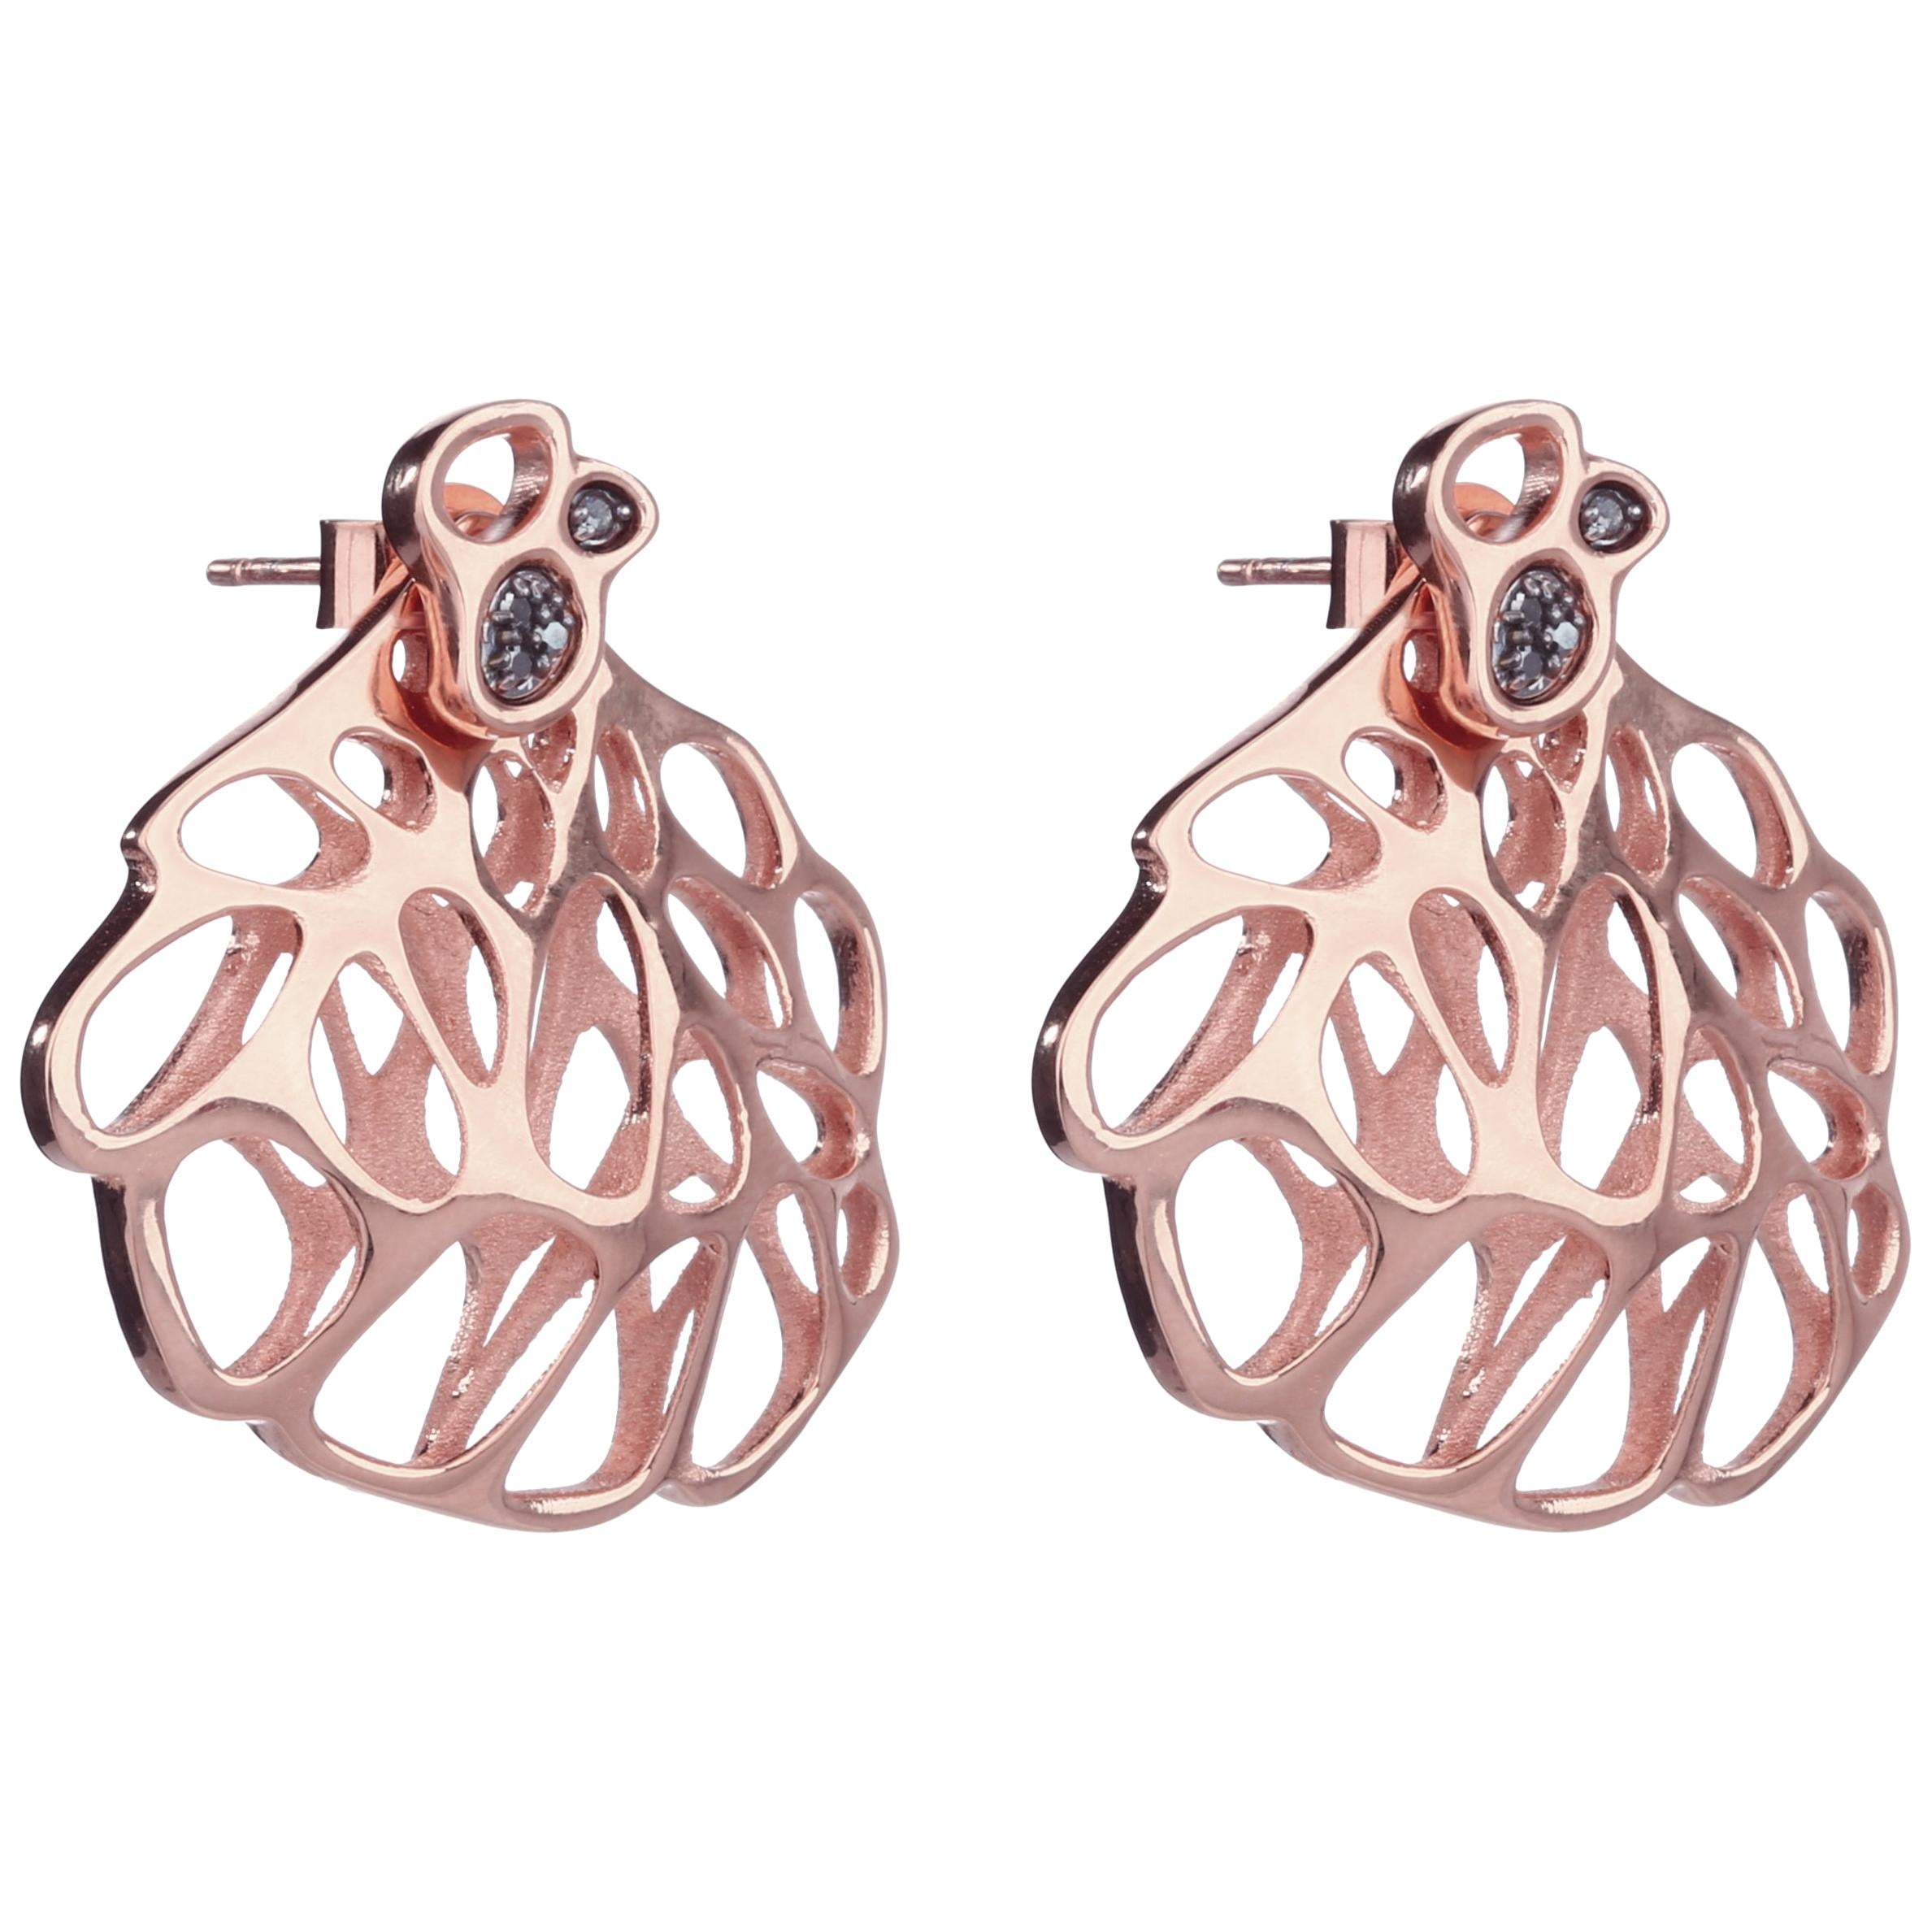 FLOWEN Sterling Silver Aoda Studs and Earjackets in Rose Gold and Grey Diamonds For Sale